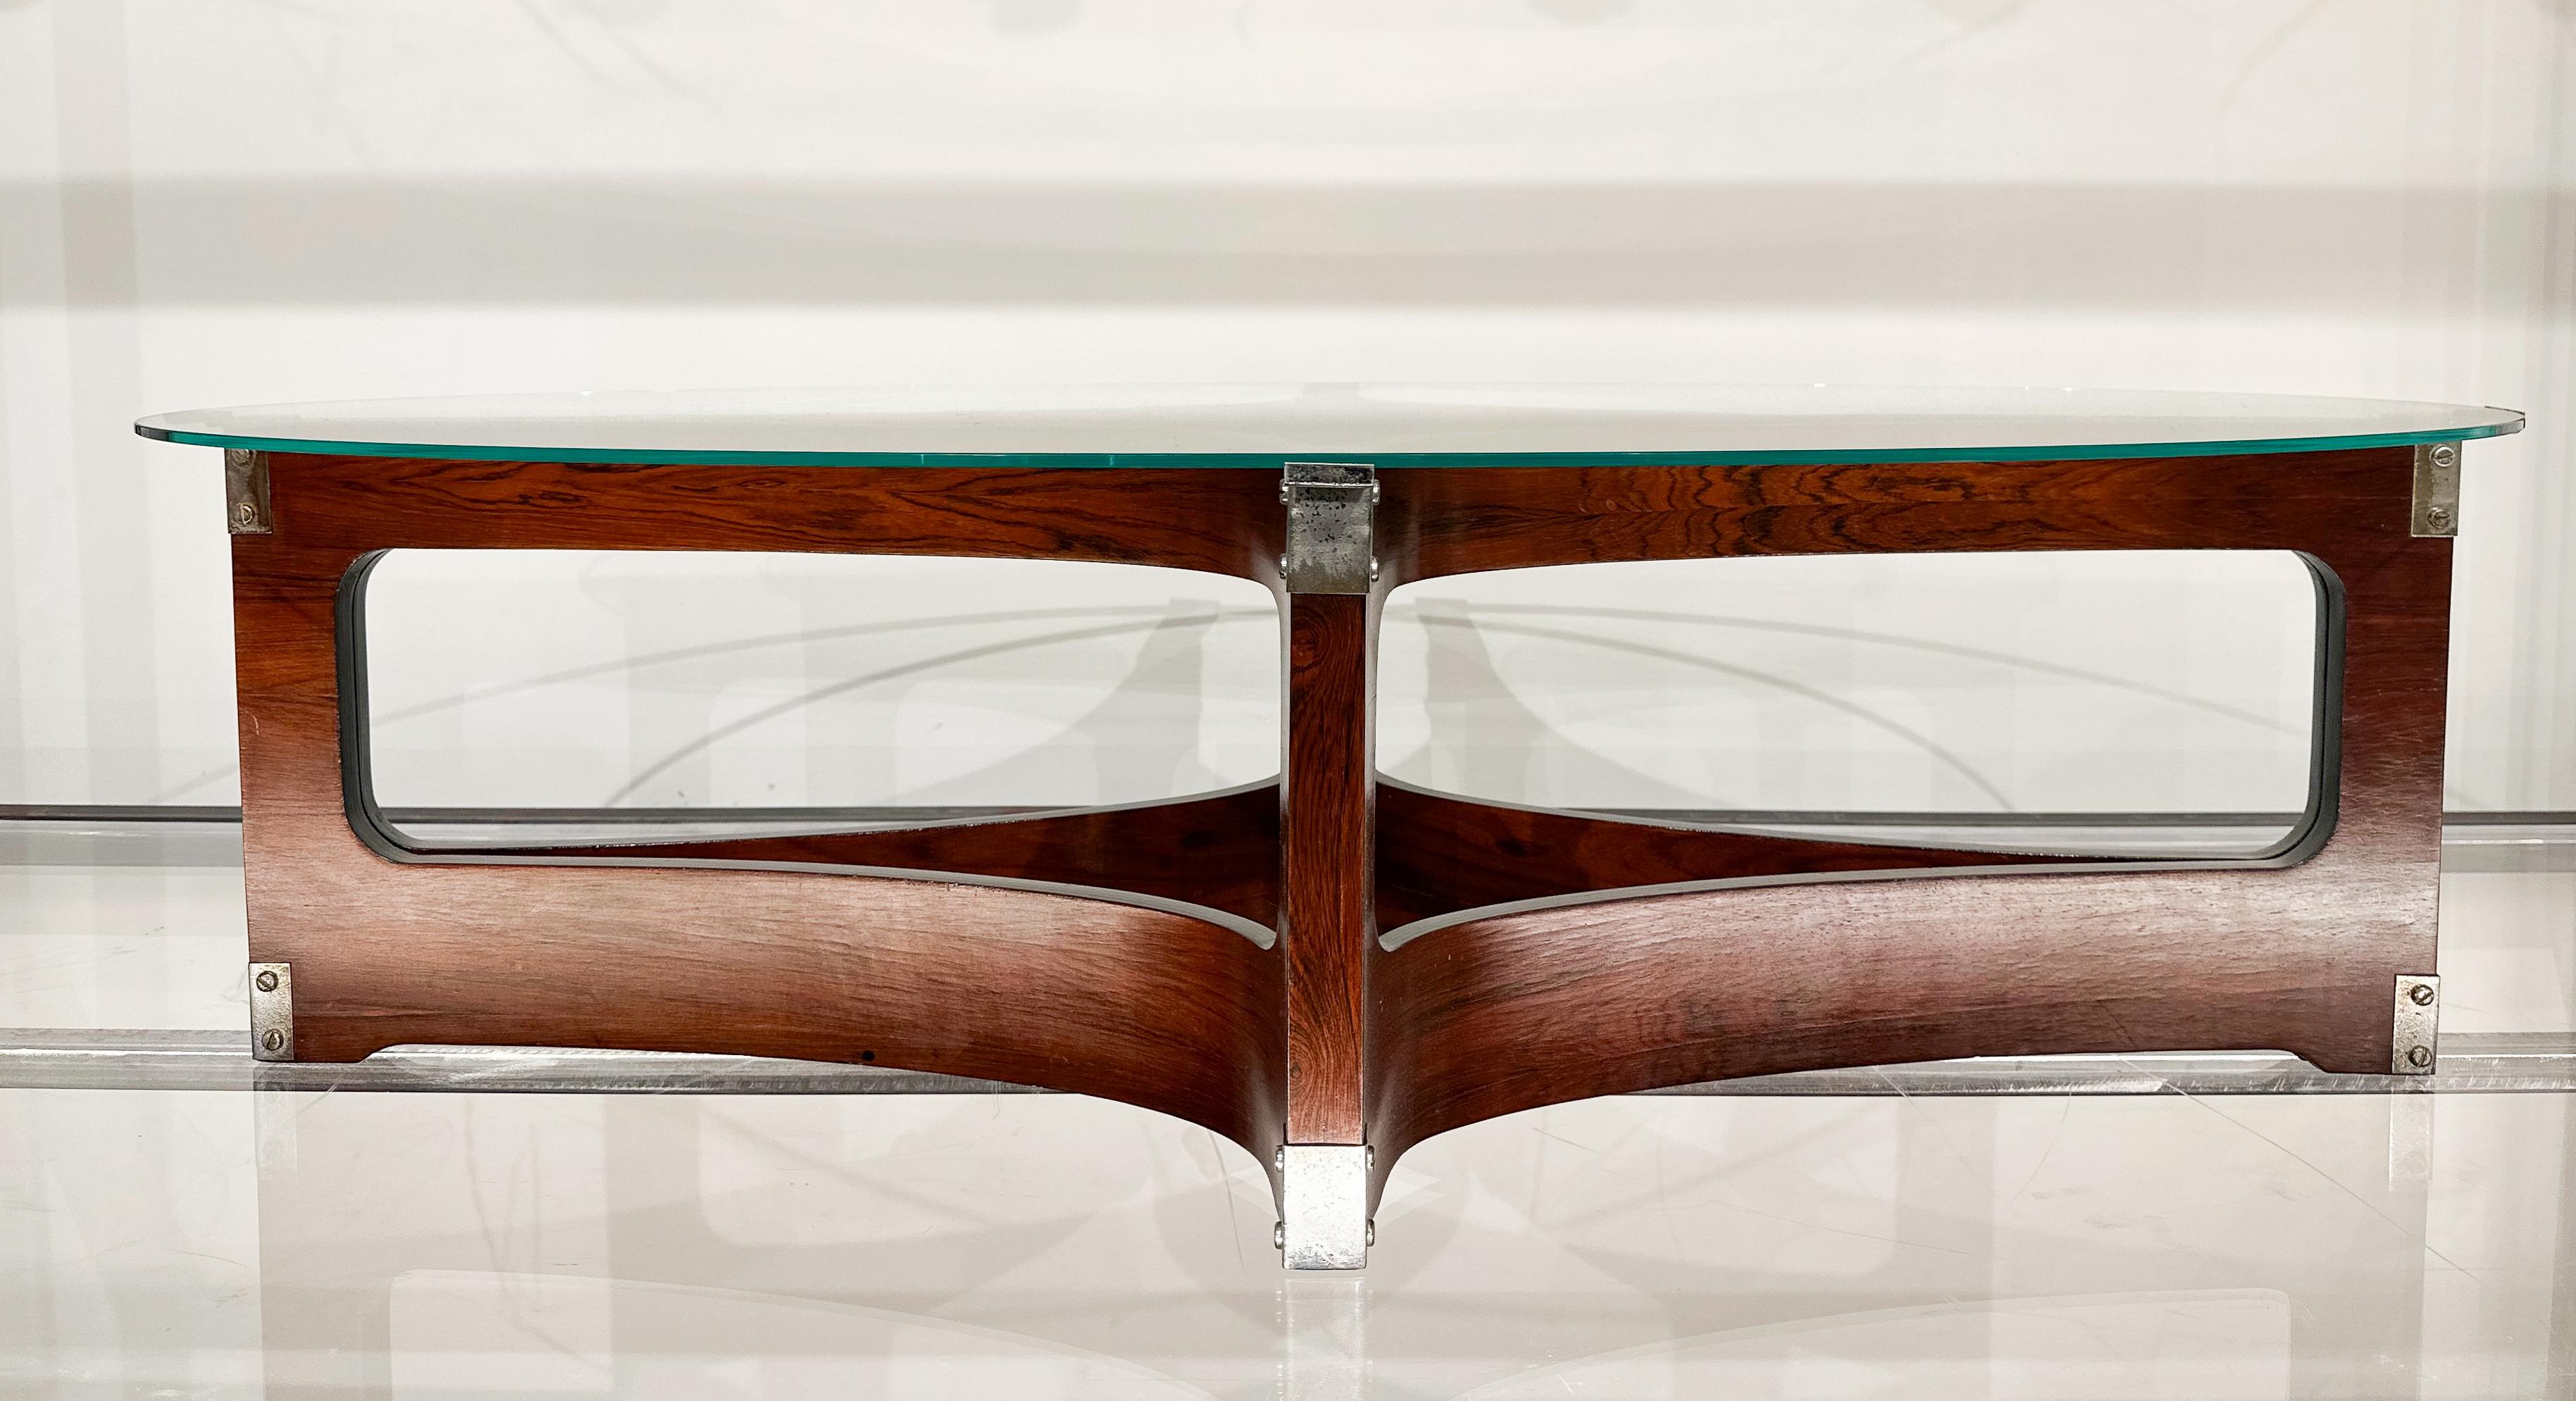 Available today with domestic shipping included, this Brazilian Modern Coffee Table in Bent Wood & Glass, Novo Rumo made in Brazil during the  1960s is nothing less than spectacular!

Made with bent rosewood this coffee table exudes timeless beauty.